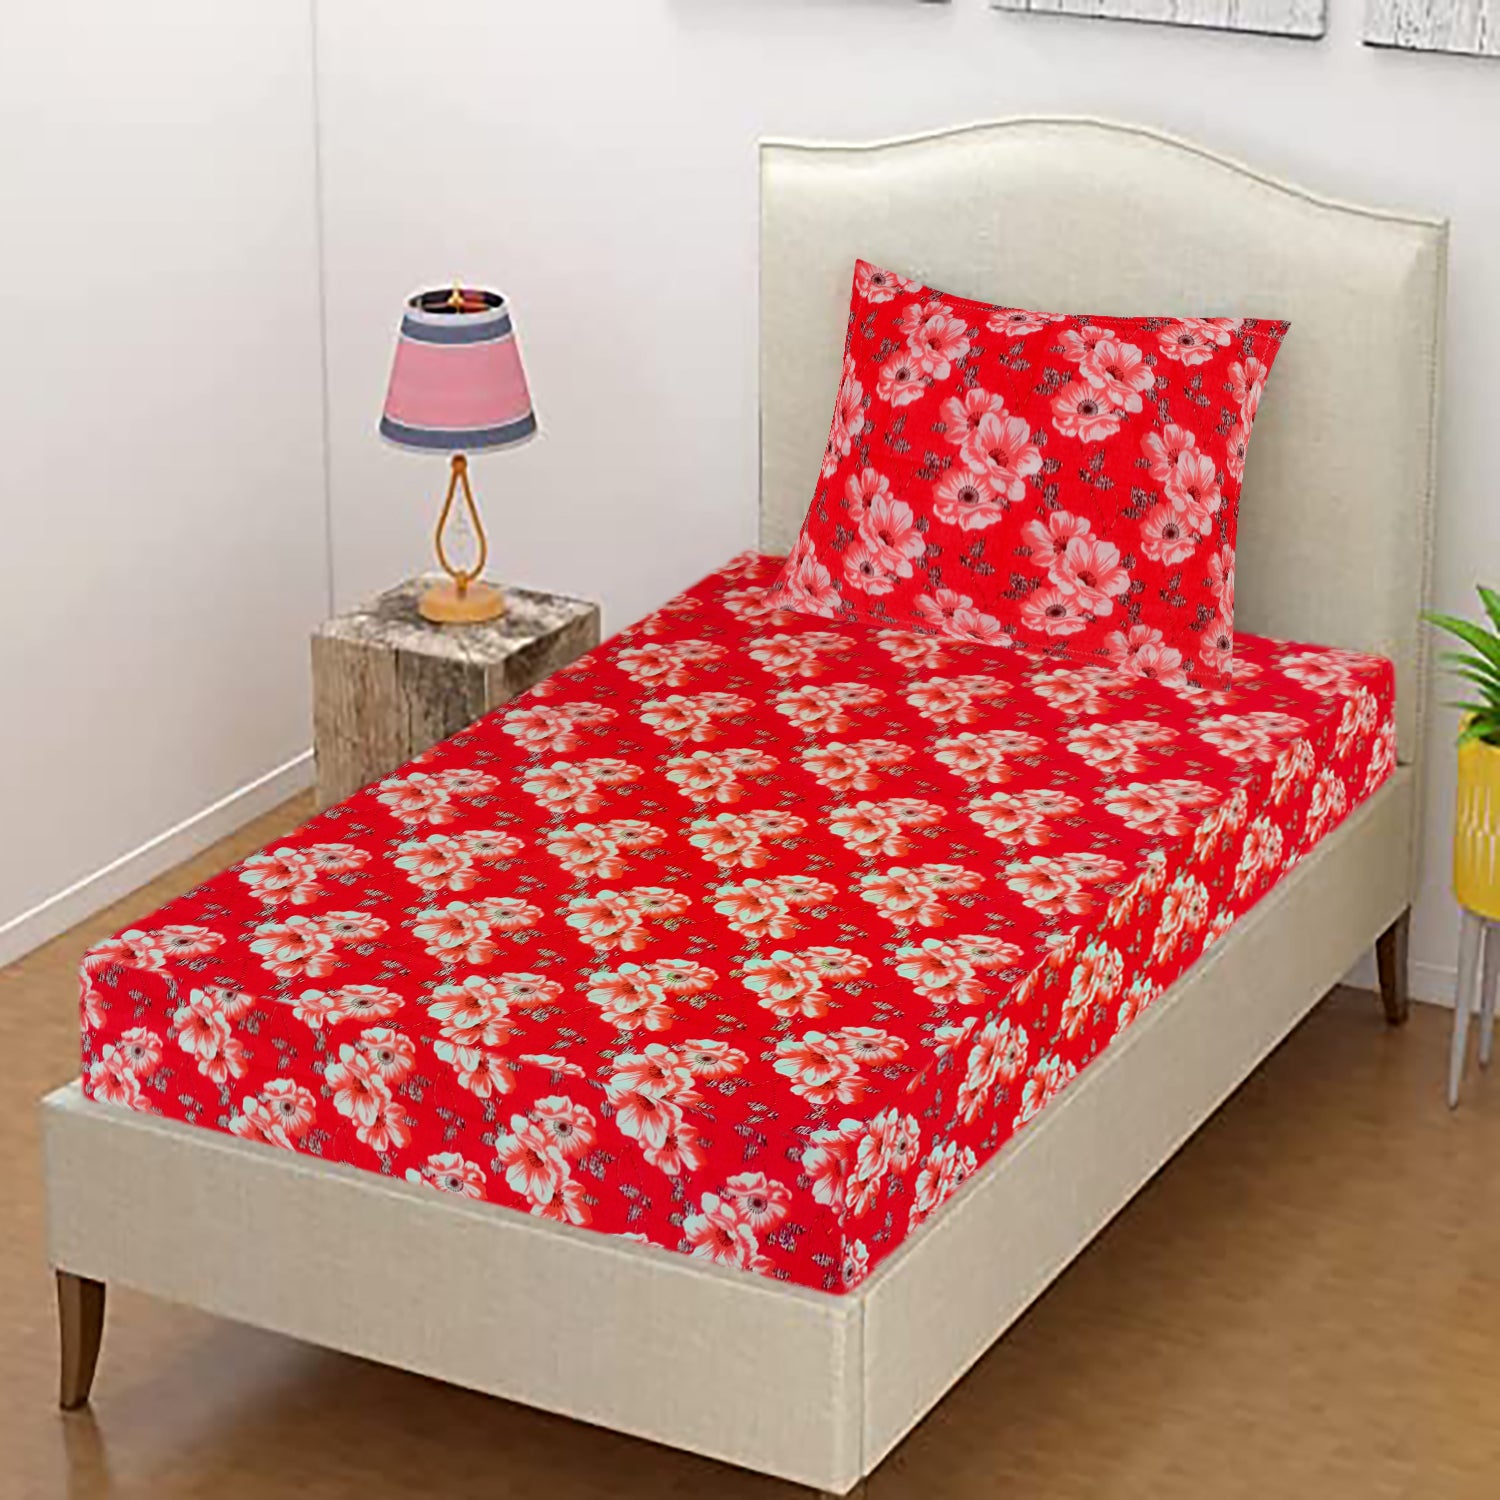 T.T. Coral & White Floral Print Single Bedsheet with 1 Pillow Cover